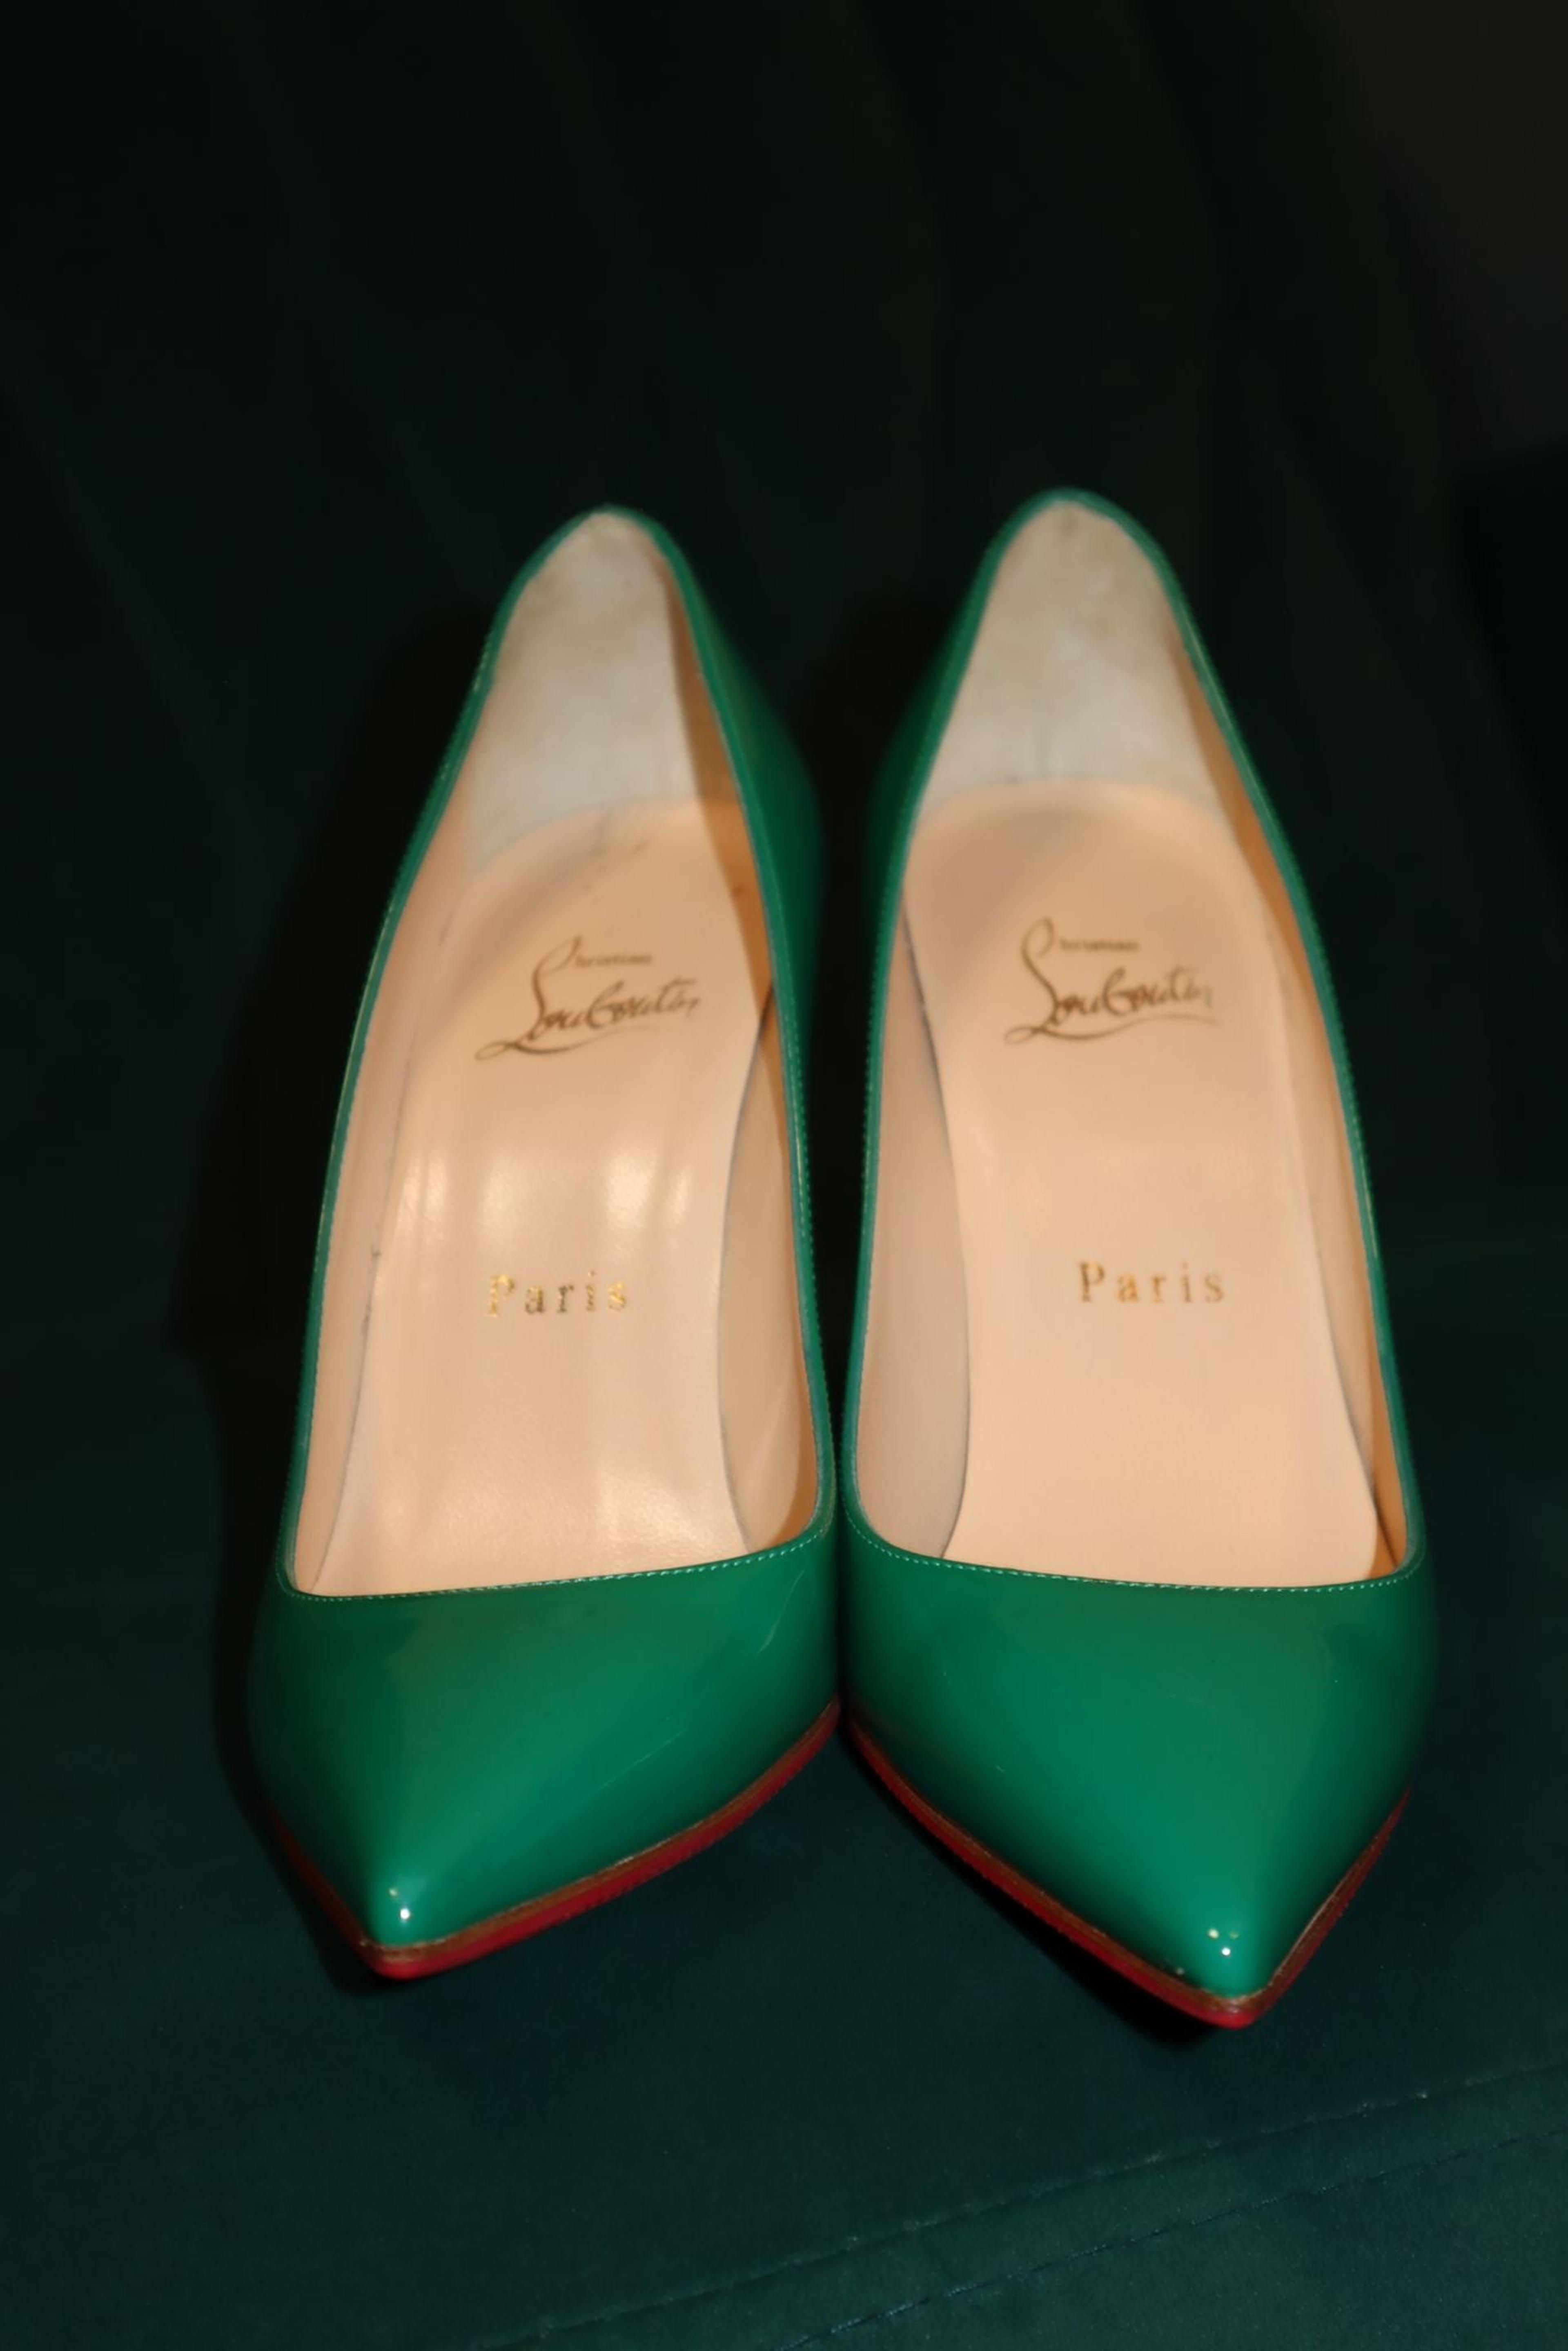 Alternate View 1 of Christian Louboutin Green Patent Leather Kate Pumps 35.5